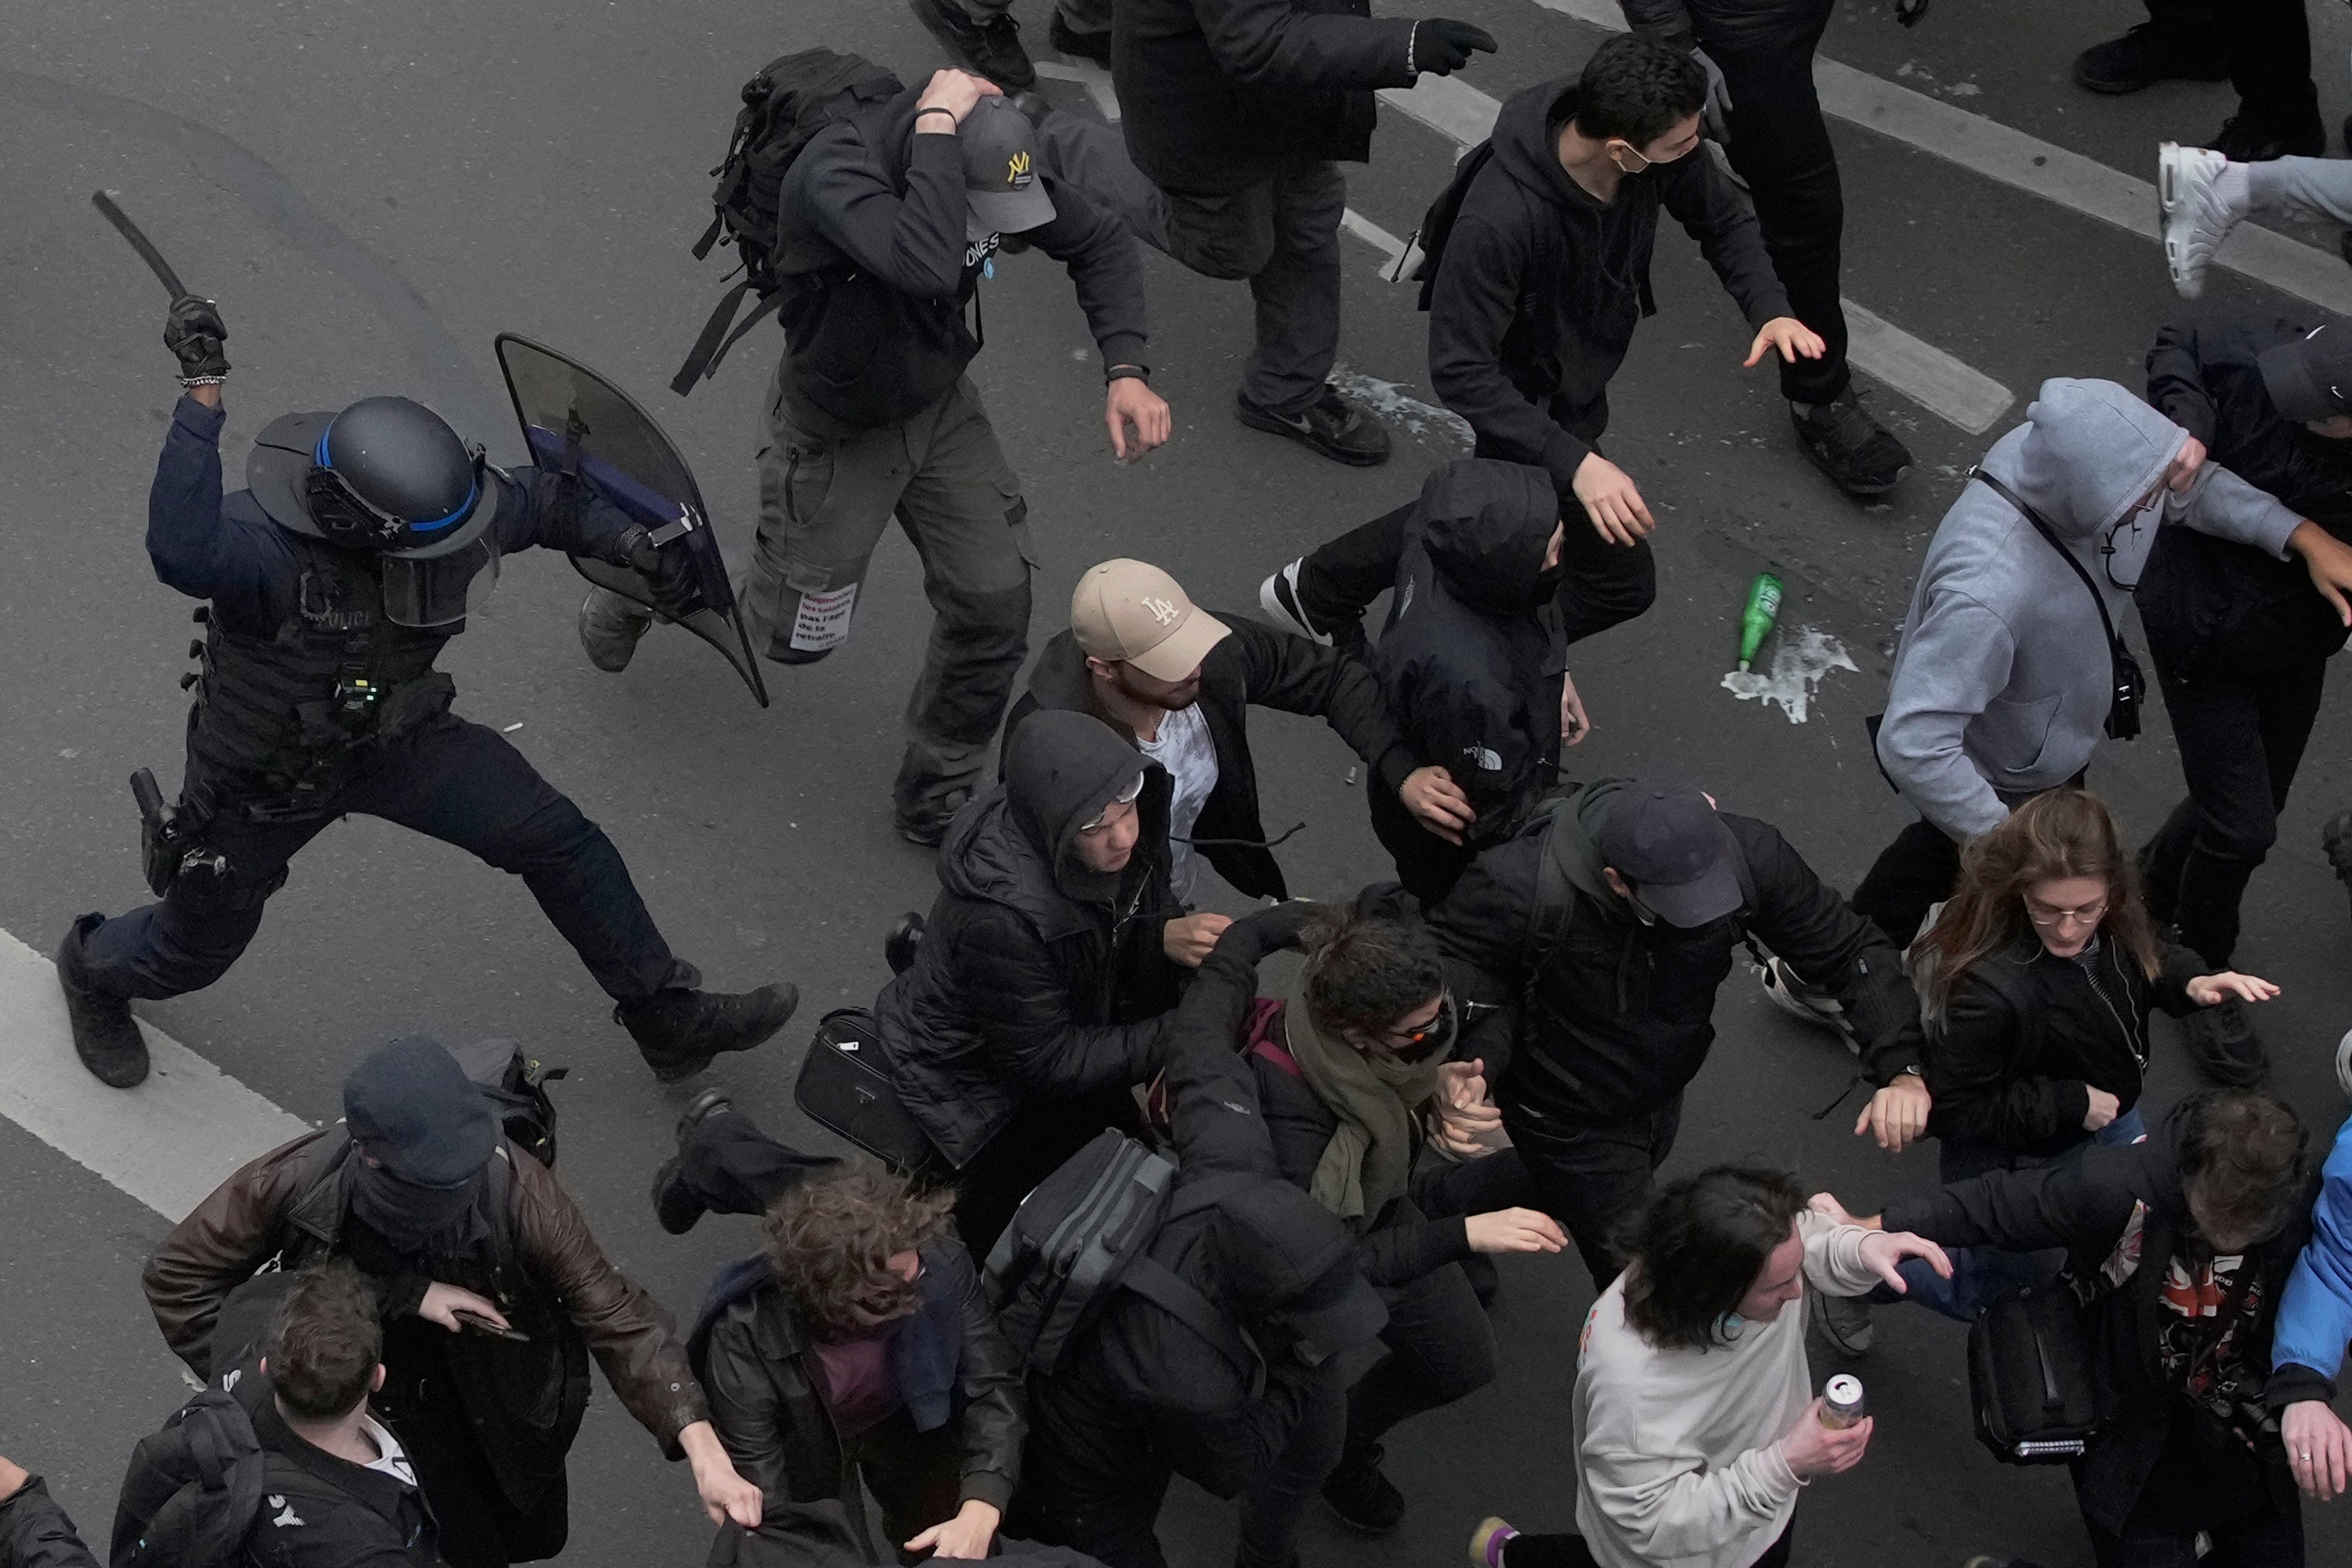 Riot police scuffle with protesters during a rally in Paris on Thursday